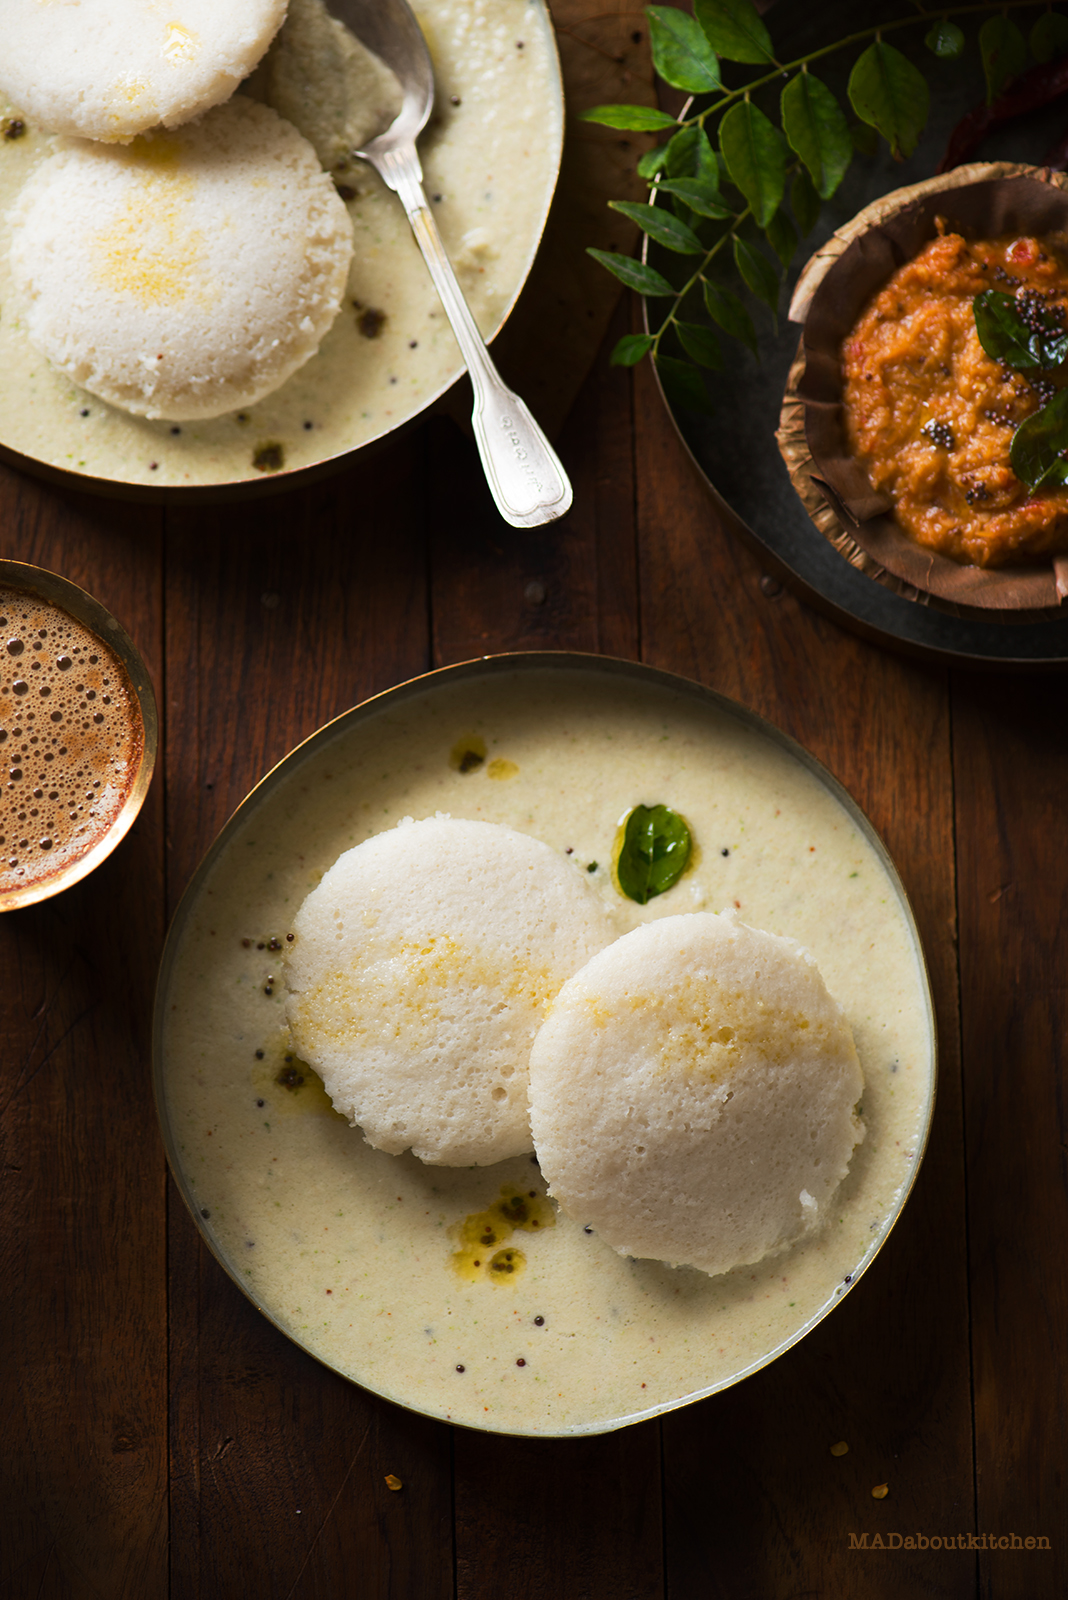 Idli is one of the most famous and most common breakfast dishes in India , specially in South India. Idly is a soft rice dumplings which are steamed and considered very healthy. 